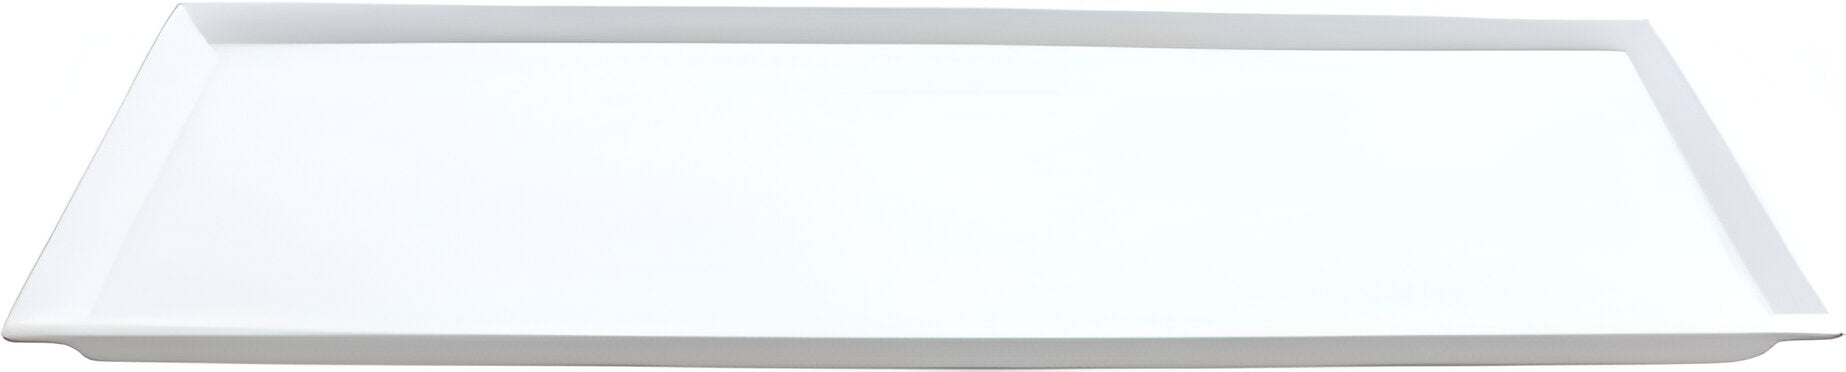 Bugambilia - 12.31" White Rectangular Serving Plate With Lid Cover - LCIH1/3-MOD-WW